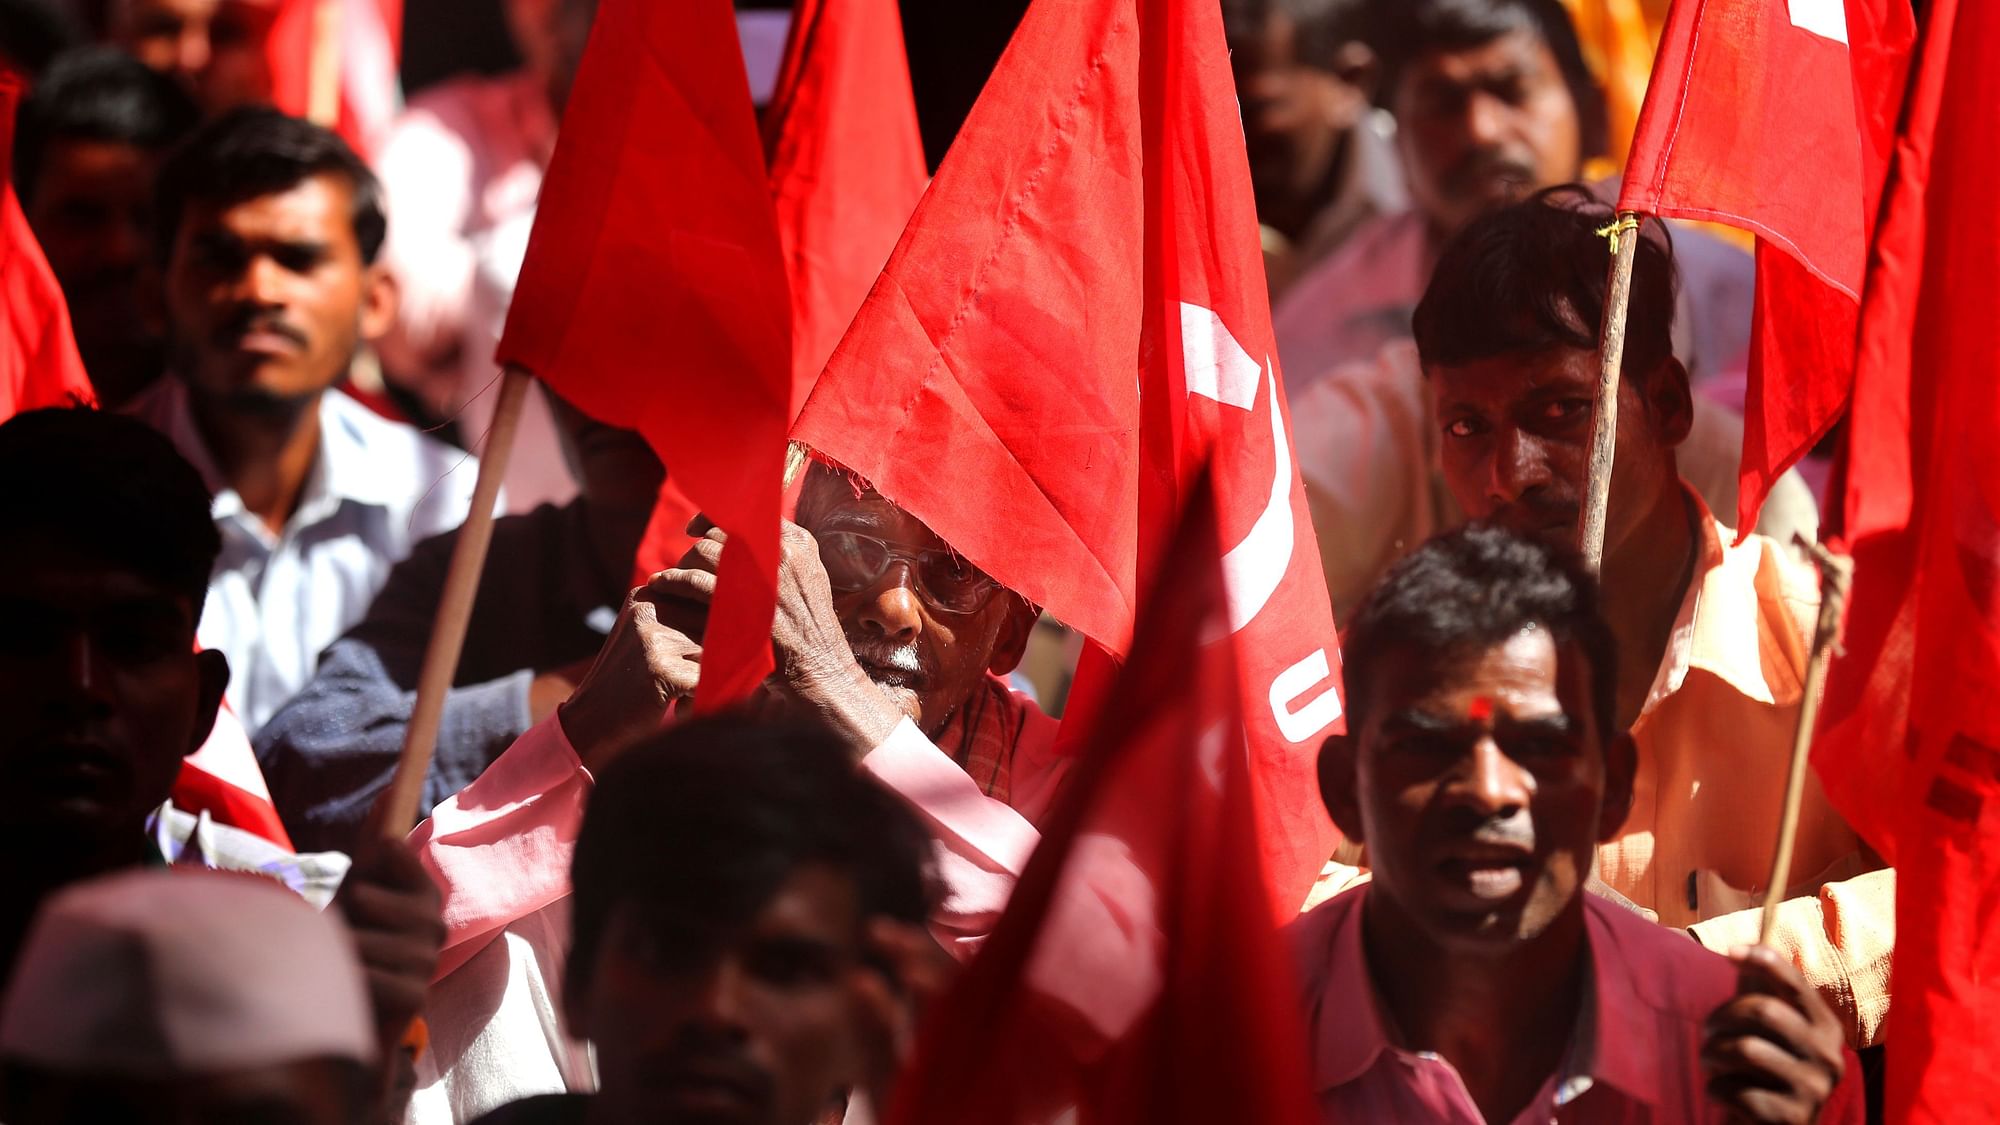 Trade union members hold flags as they participate in a demonstration on the first day of a two-day general strike called by various trade unions in Mumbai, India.